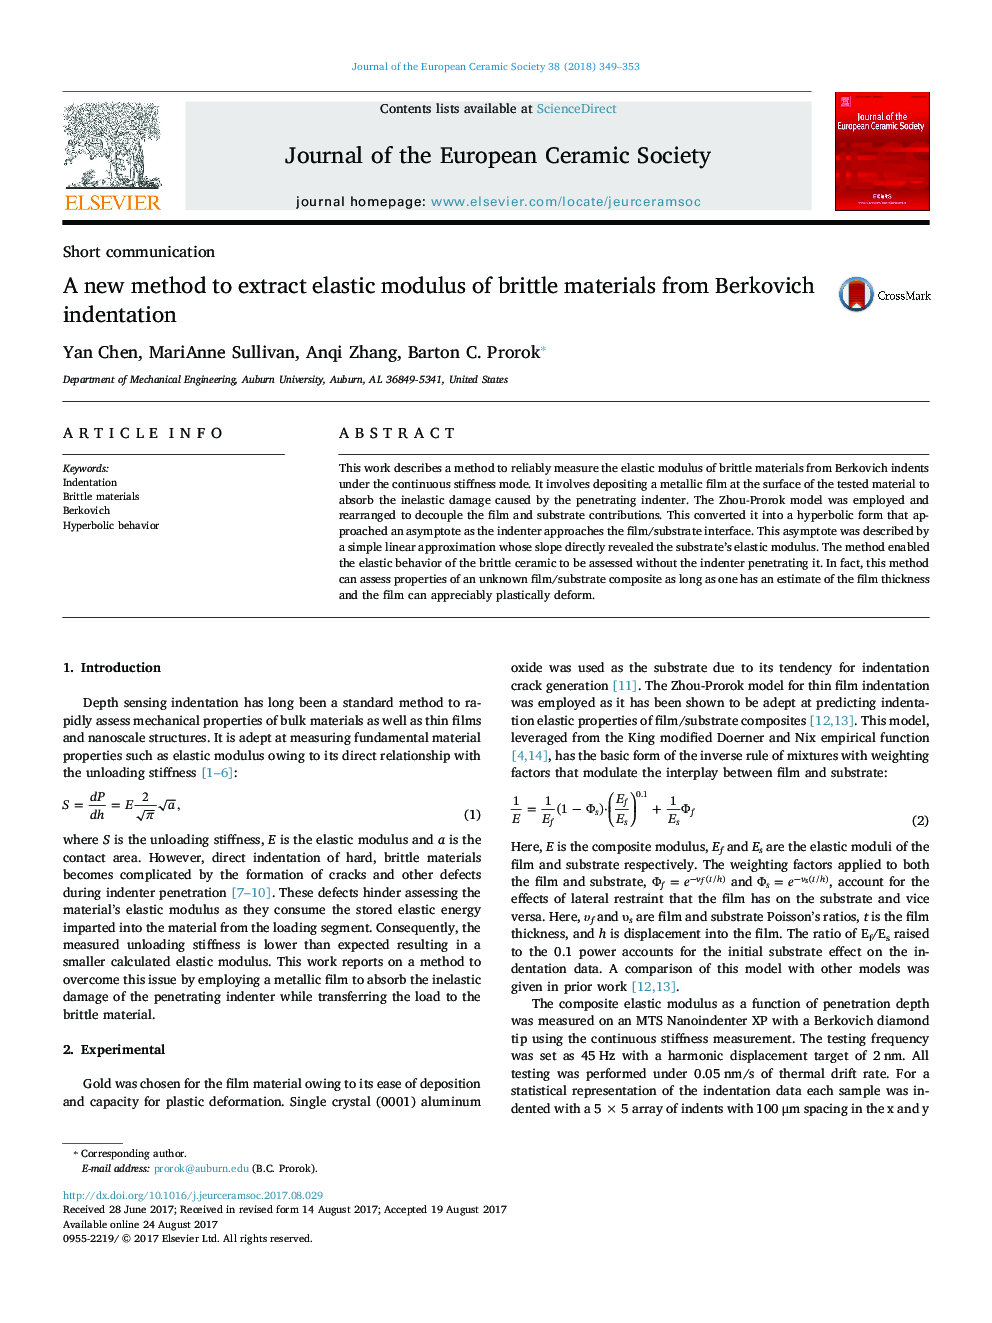 A new method to extract elastic modulus of brittle materials from Berkovich indentation